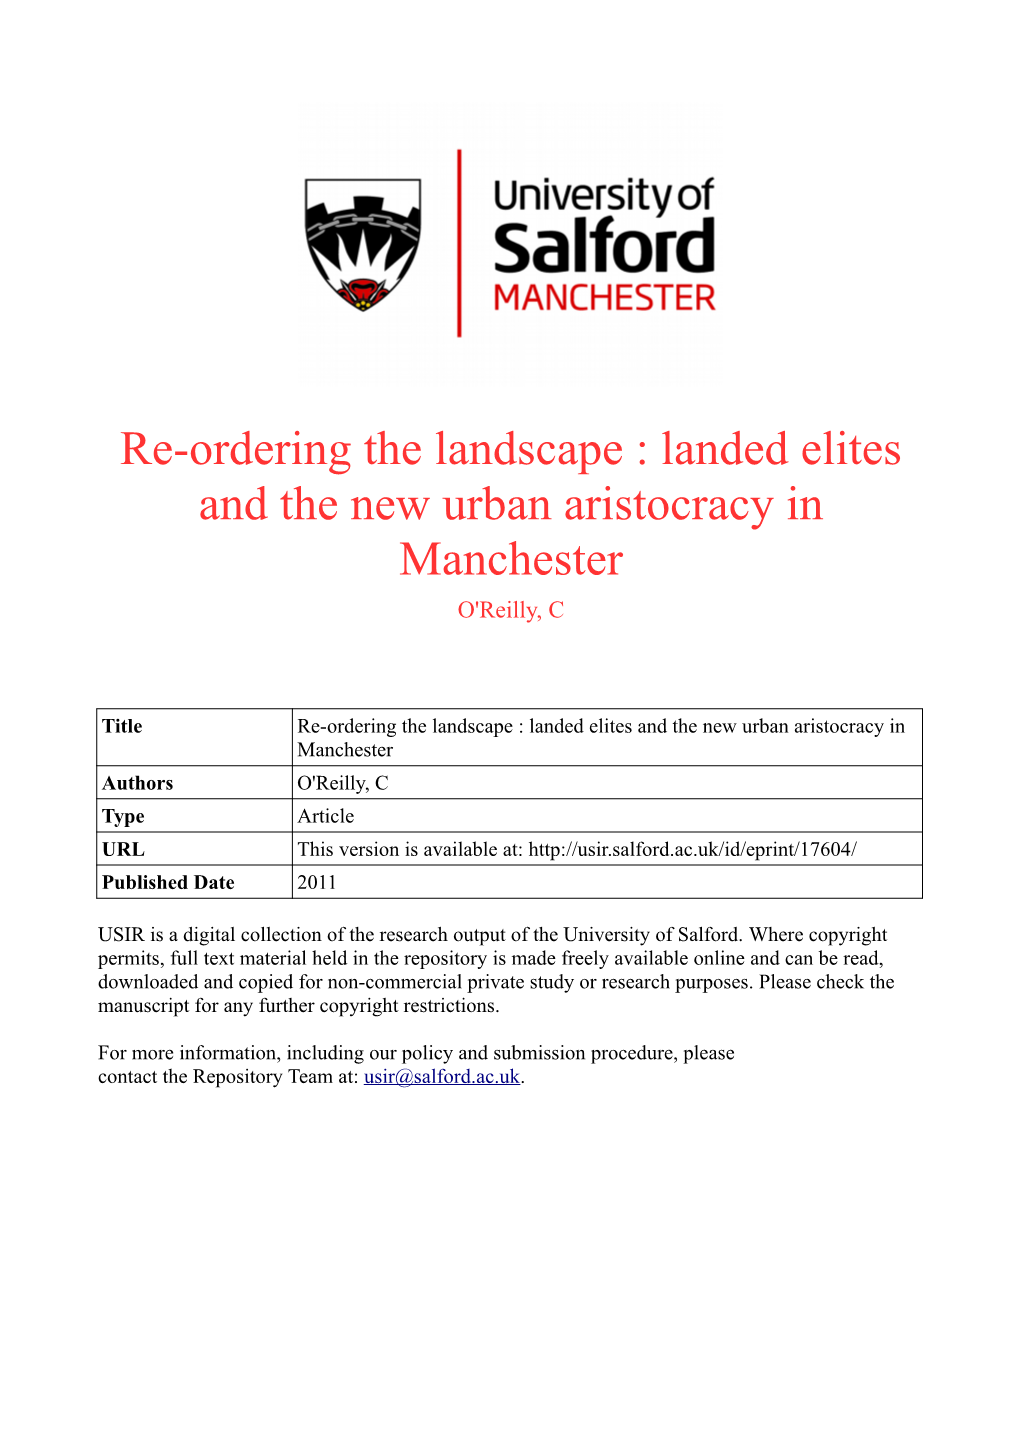 Landed Elites and the New Urban Aristocracy in Manchester O'reilly, C